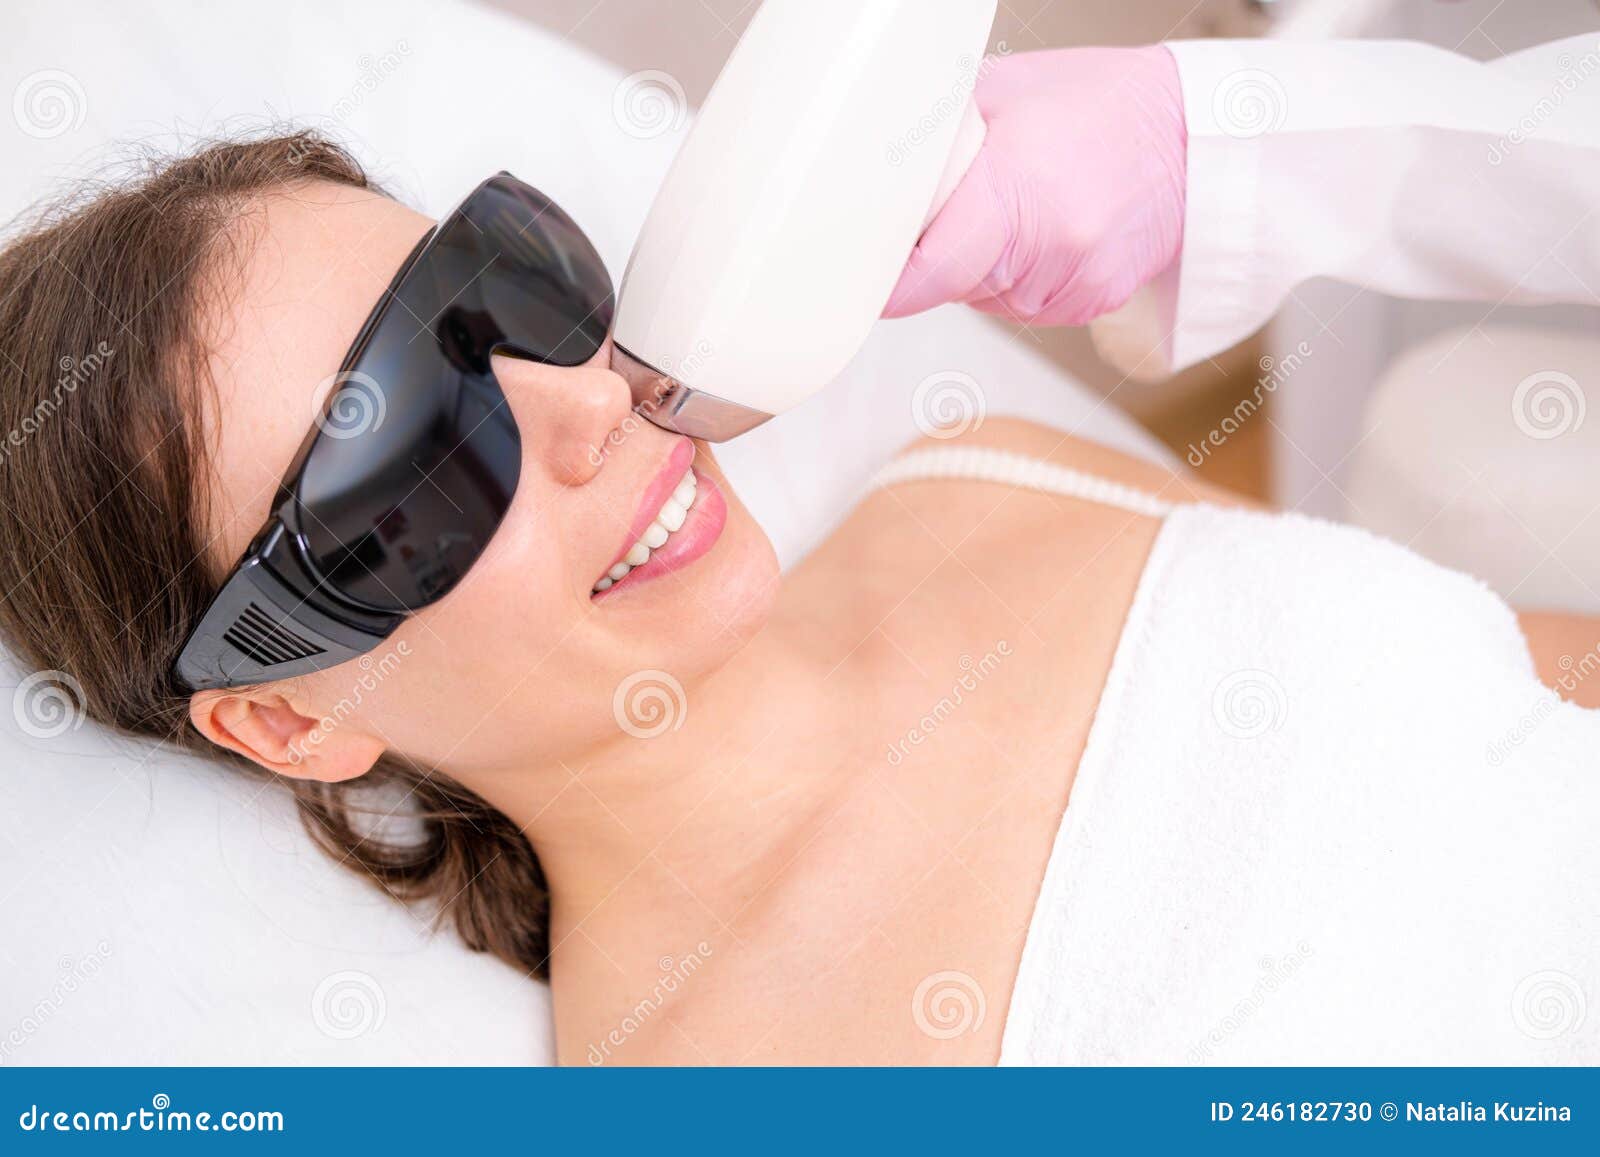 diode laser hair removal, beautician removes hair on beautiful female face, hair removal for smooth skin, laser